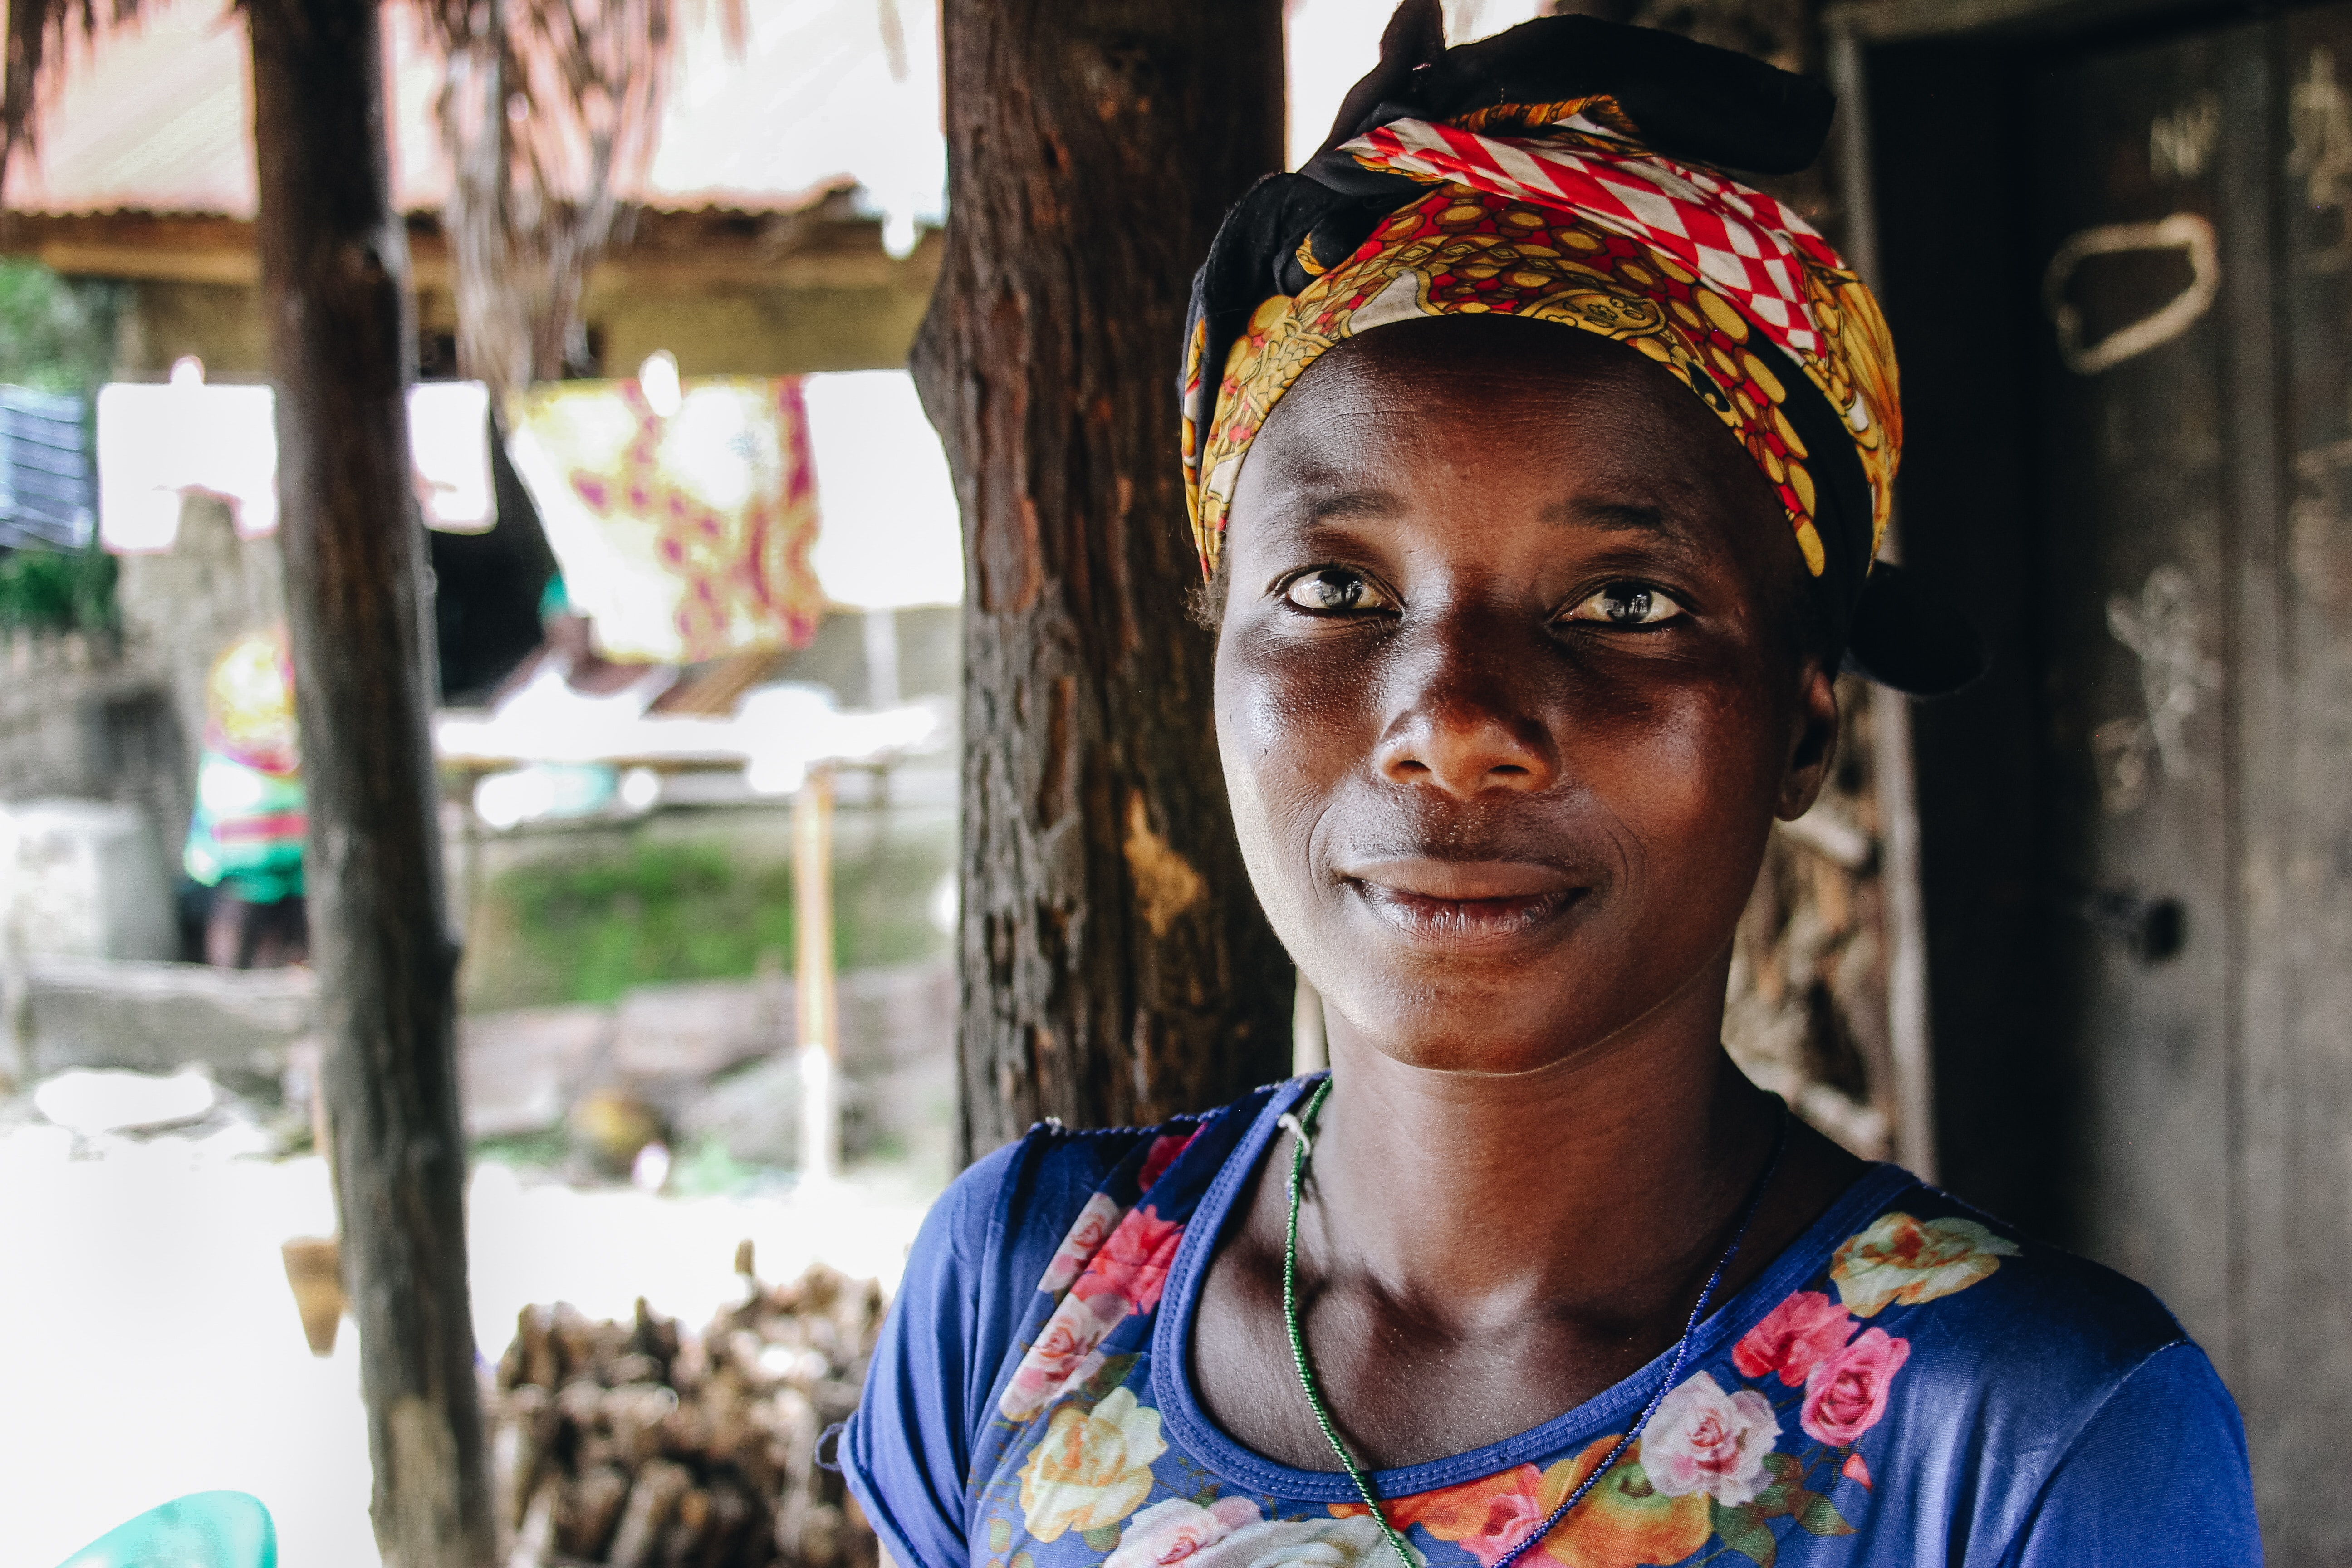 Voices of women with obstetric fistula in Sierra Leone